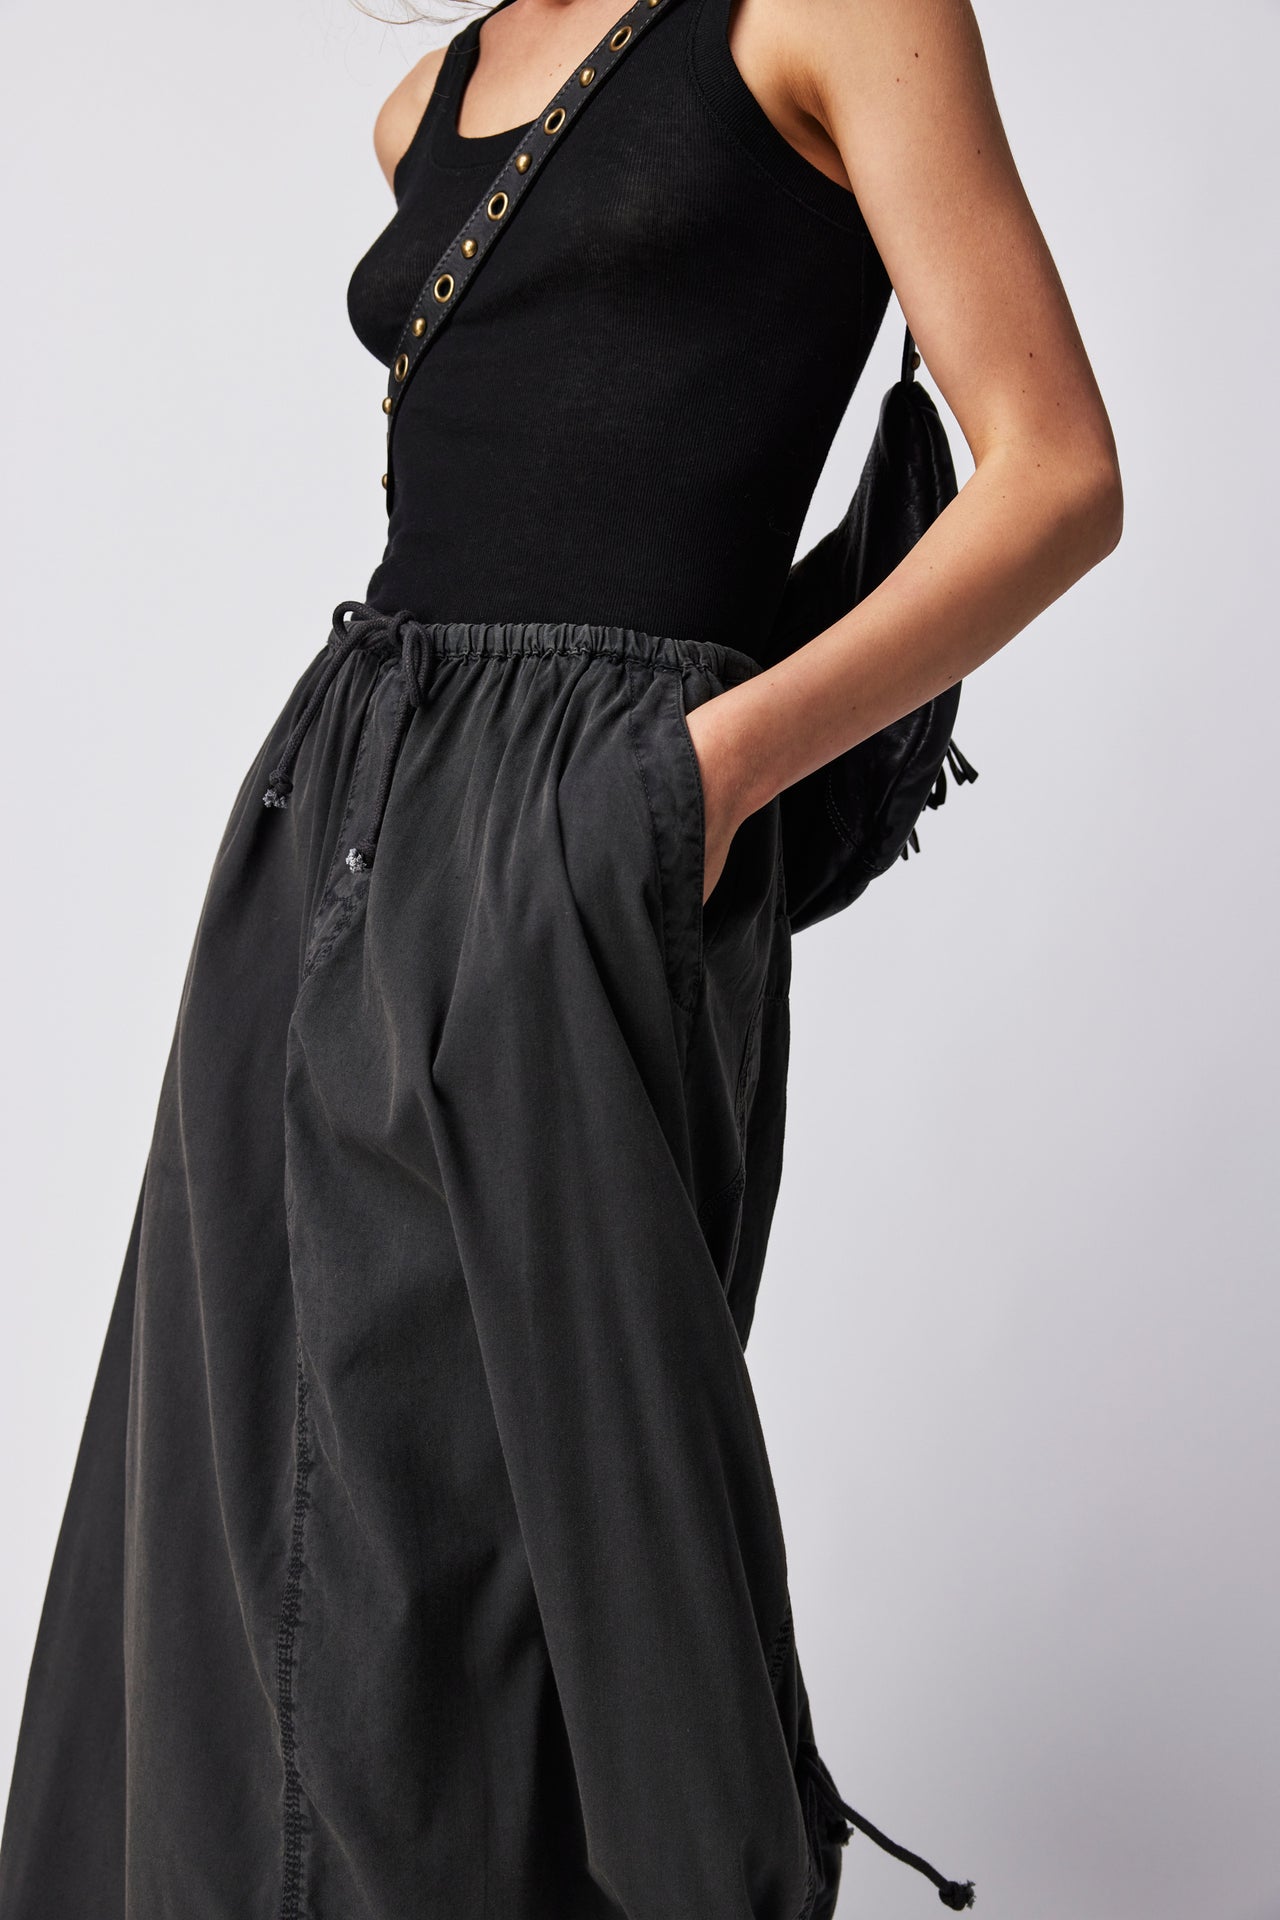 Picture Perfect Parachute Black 2, Maxi Skirt by Free People | LIT Boutique